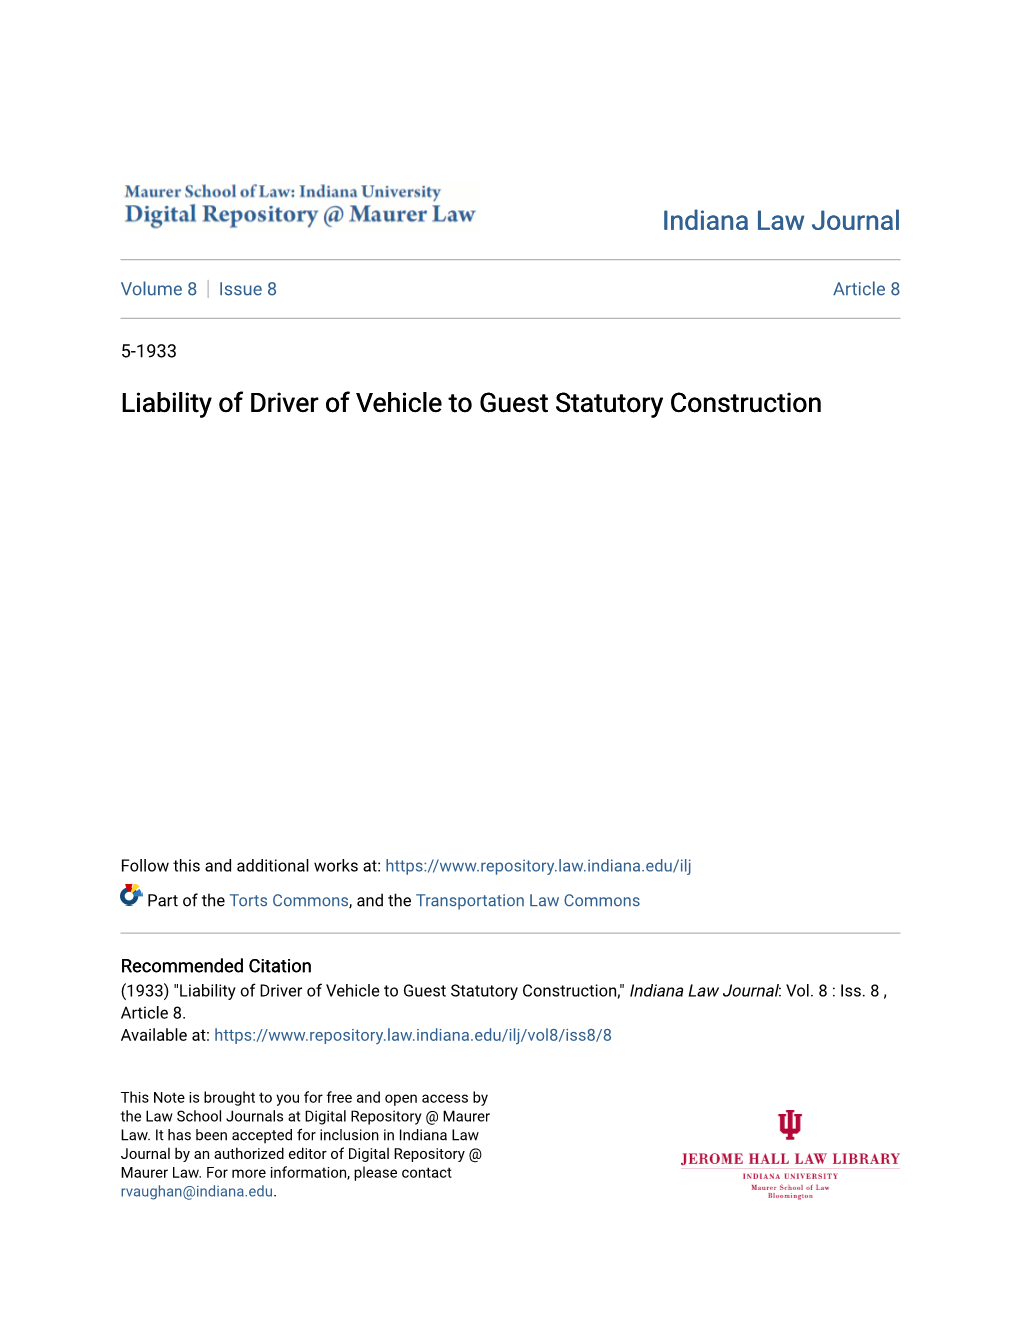 Liability of Driver of Vehicle to Guest Statutory Construction